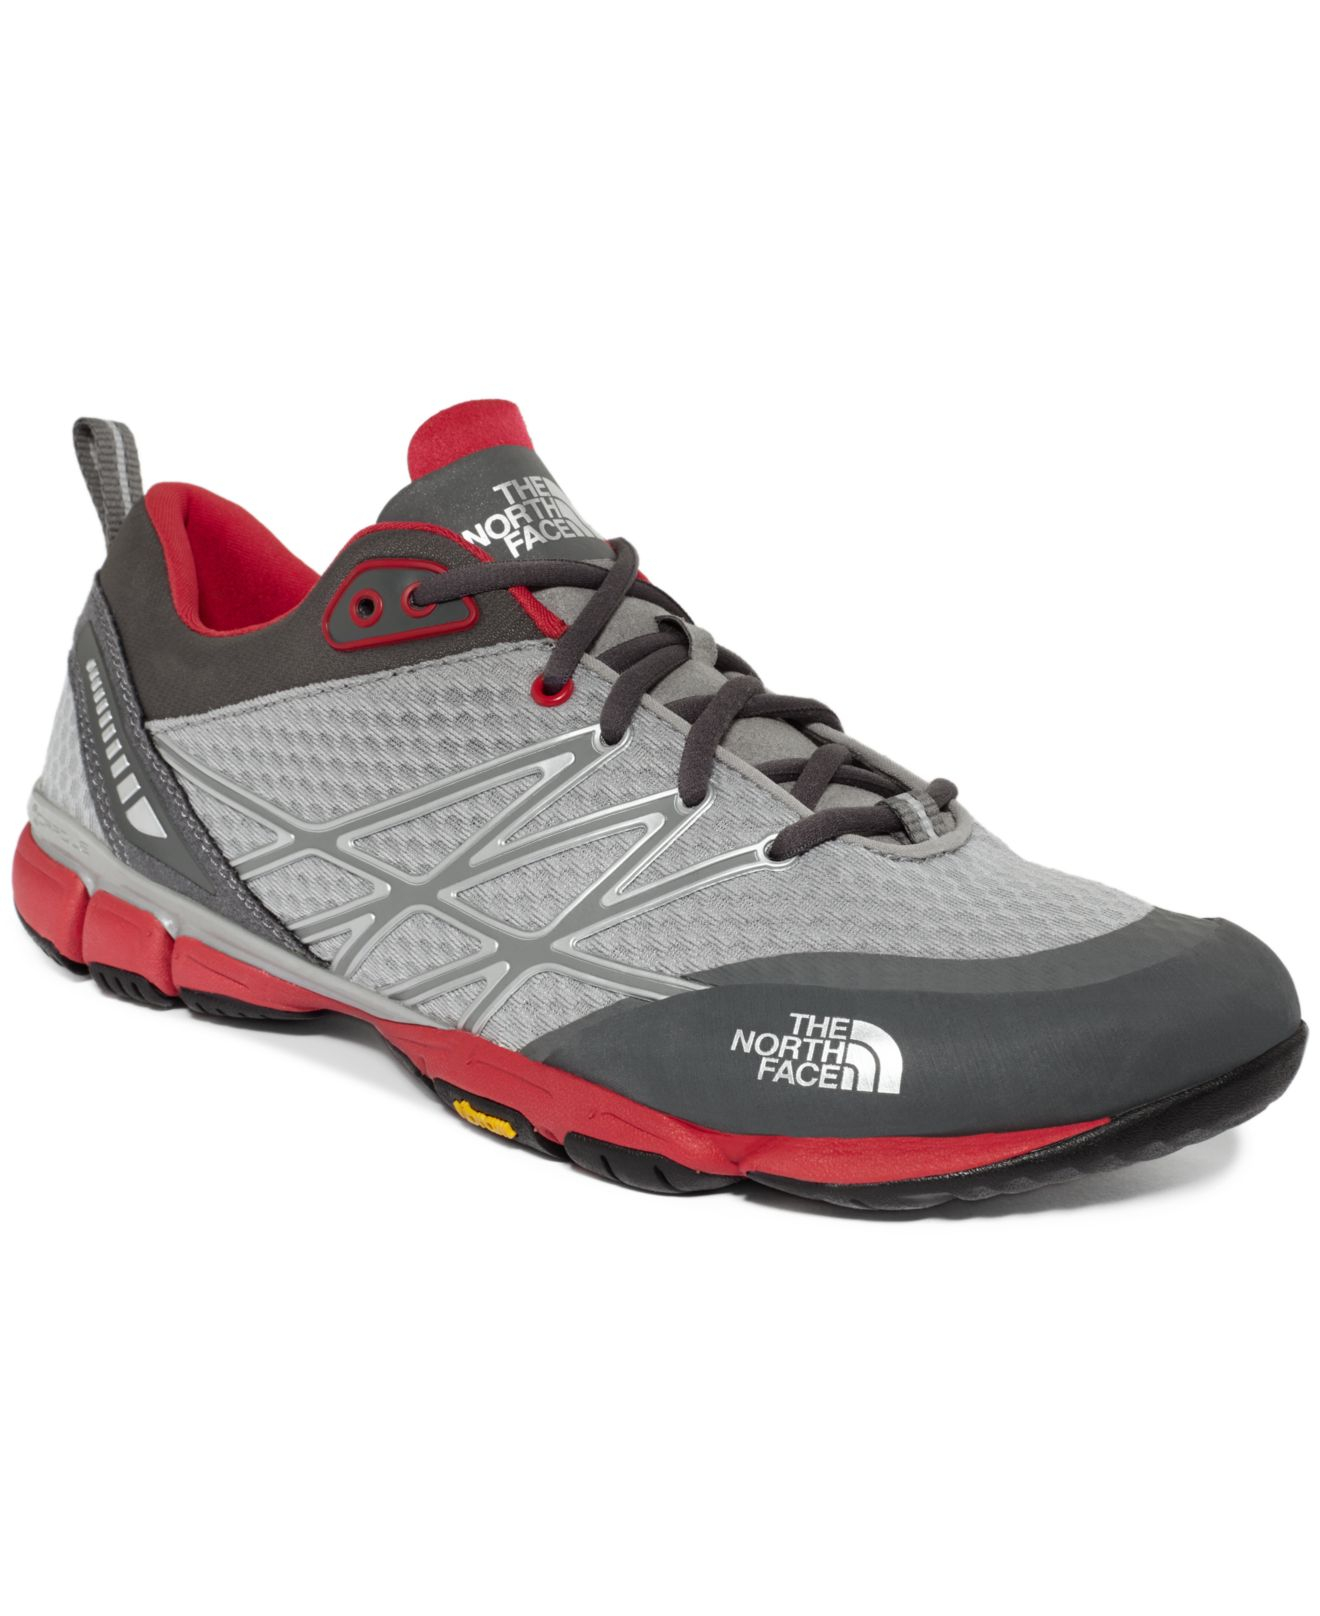 The North Face Ultra Kilowatt Sneakers in Grey/Red (Gray) for Men - Lyst